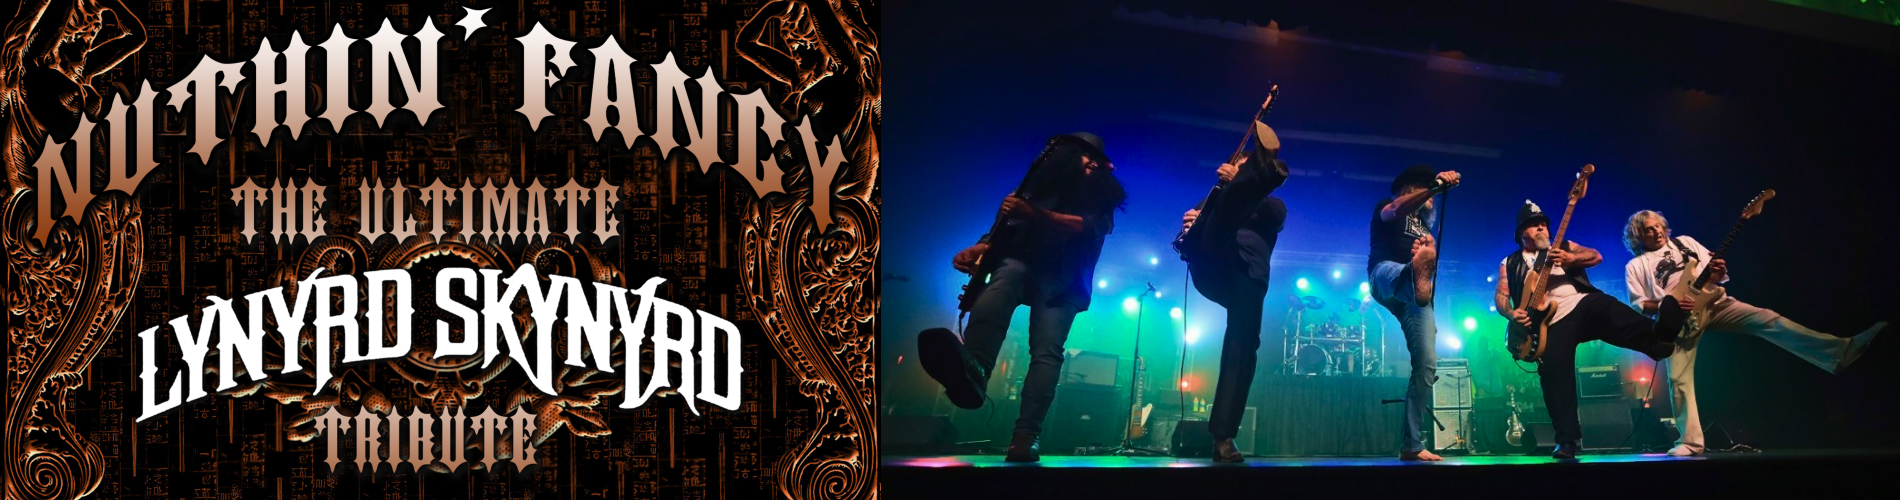 Nuthin’ Fancy: The Ultimate Lynyrd Skynyad Tribute performing live at Busch Gardens Williamsburg during the Summer Nights Concert Series.